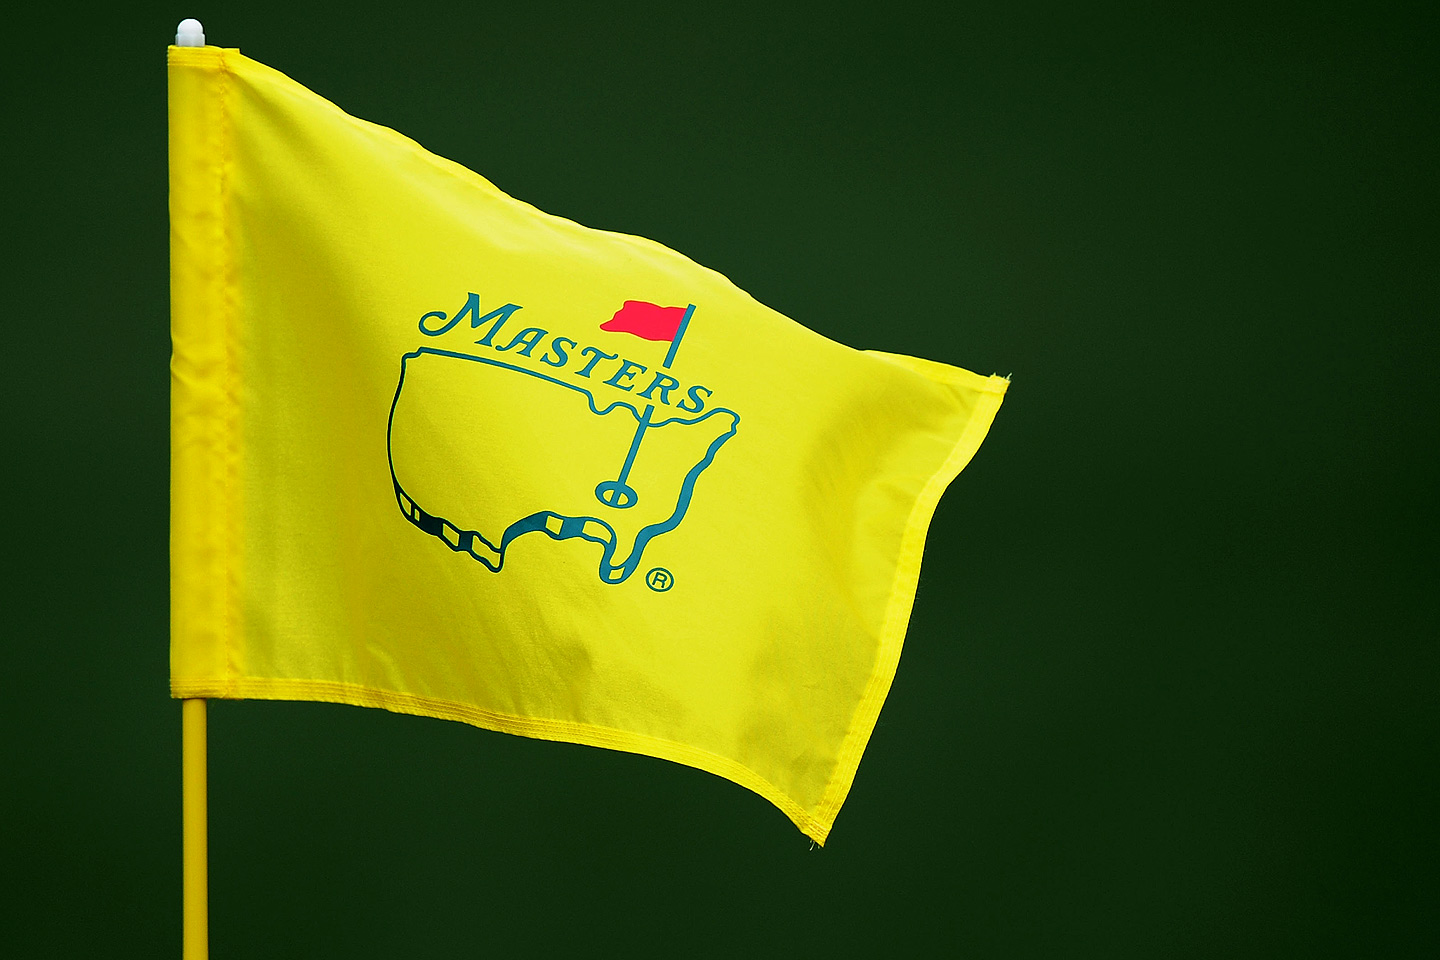 What are the odds of winning the Masters ticket lottery?